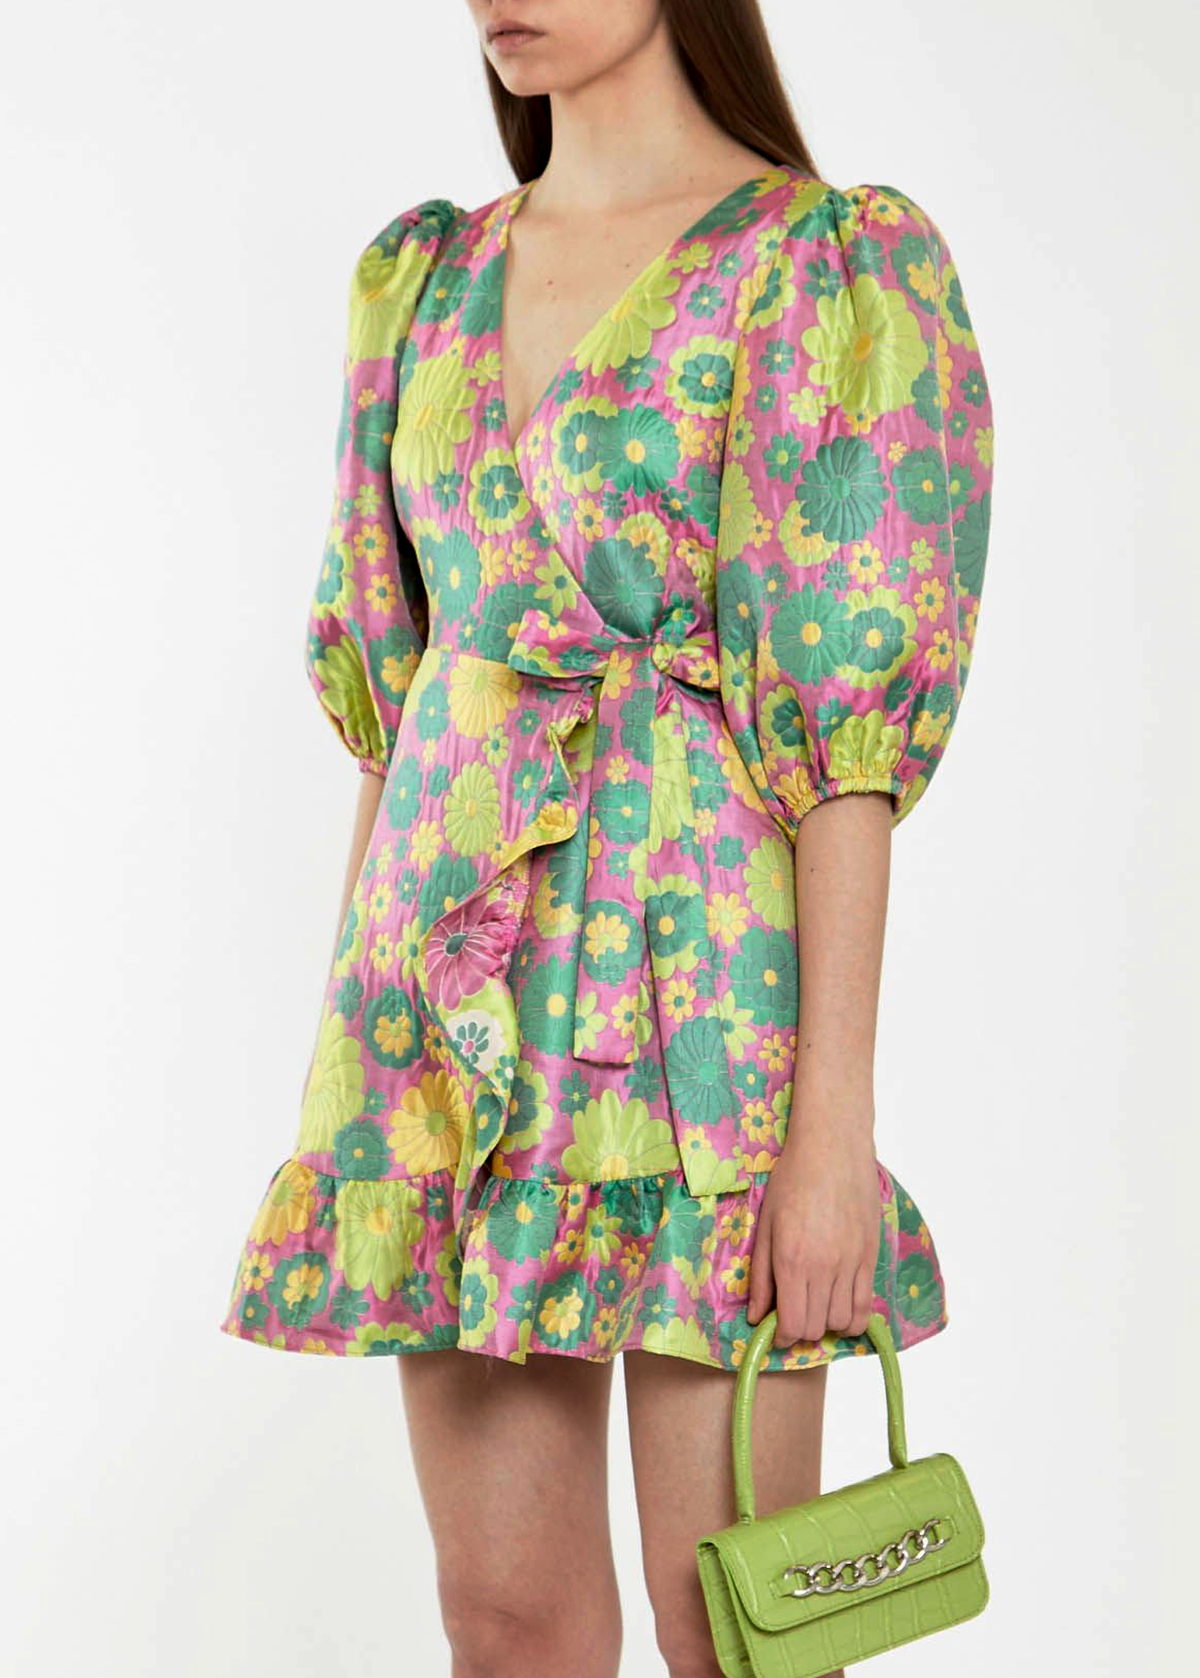 60s inspired brocade floral wrap mini dress with puff sleeves and ruffle hem, in pink, yellow, and green, by Glamorous UK